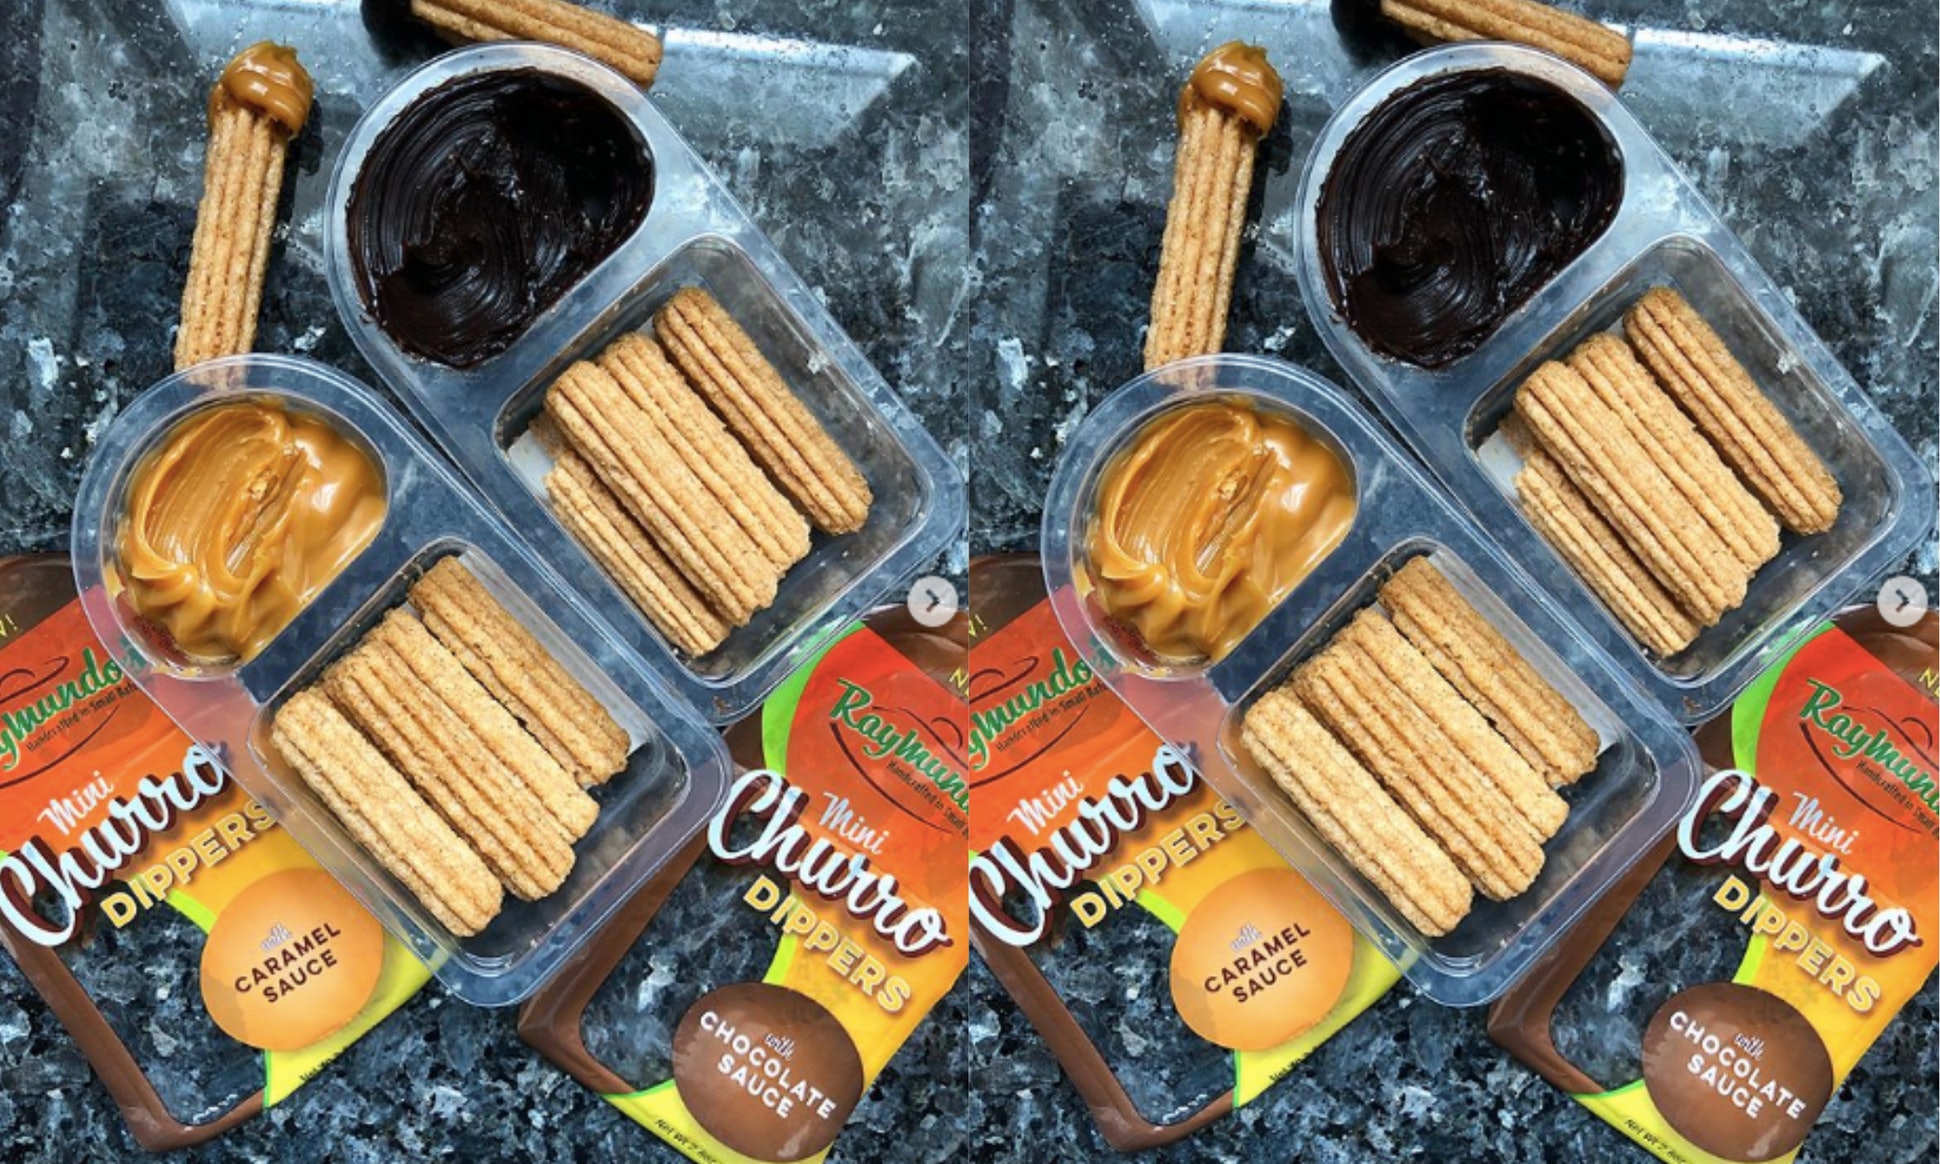 A Churros Version Of Dunkaroos Exists & It Comes In 2 Delicious Flavors - Raymundo's